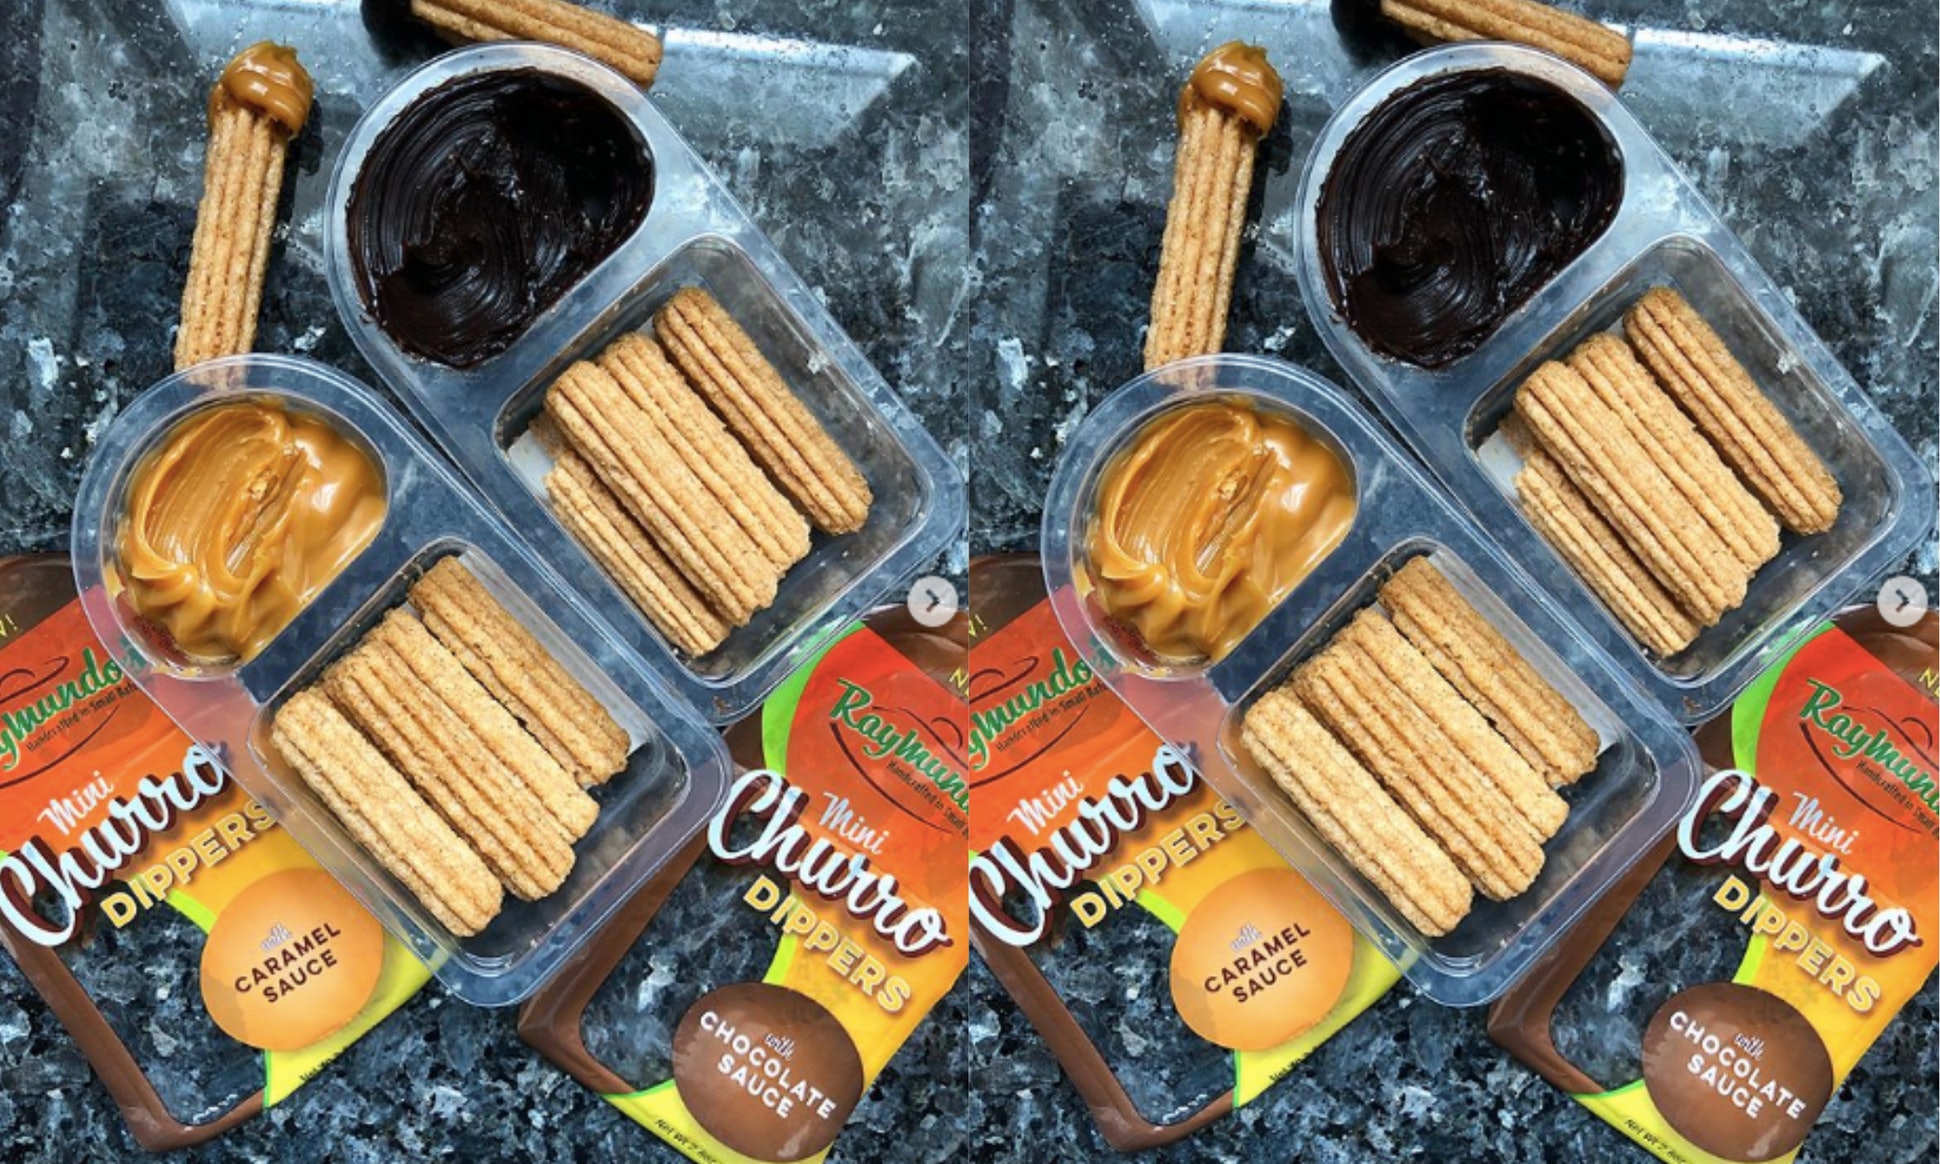 A Churros Version Of Dunkaroos Exists & It Comes In 2 Delicious Flavors - Raymundo's